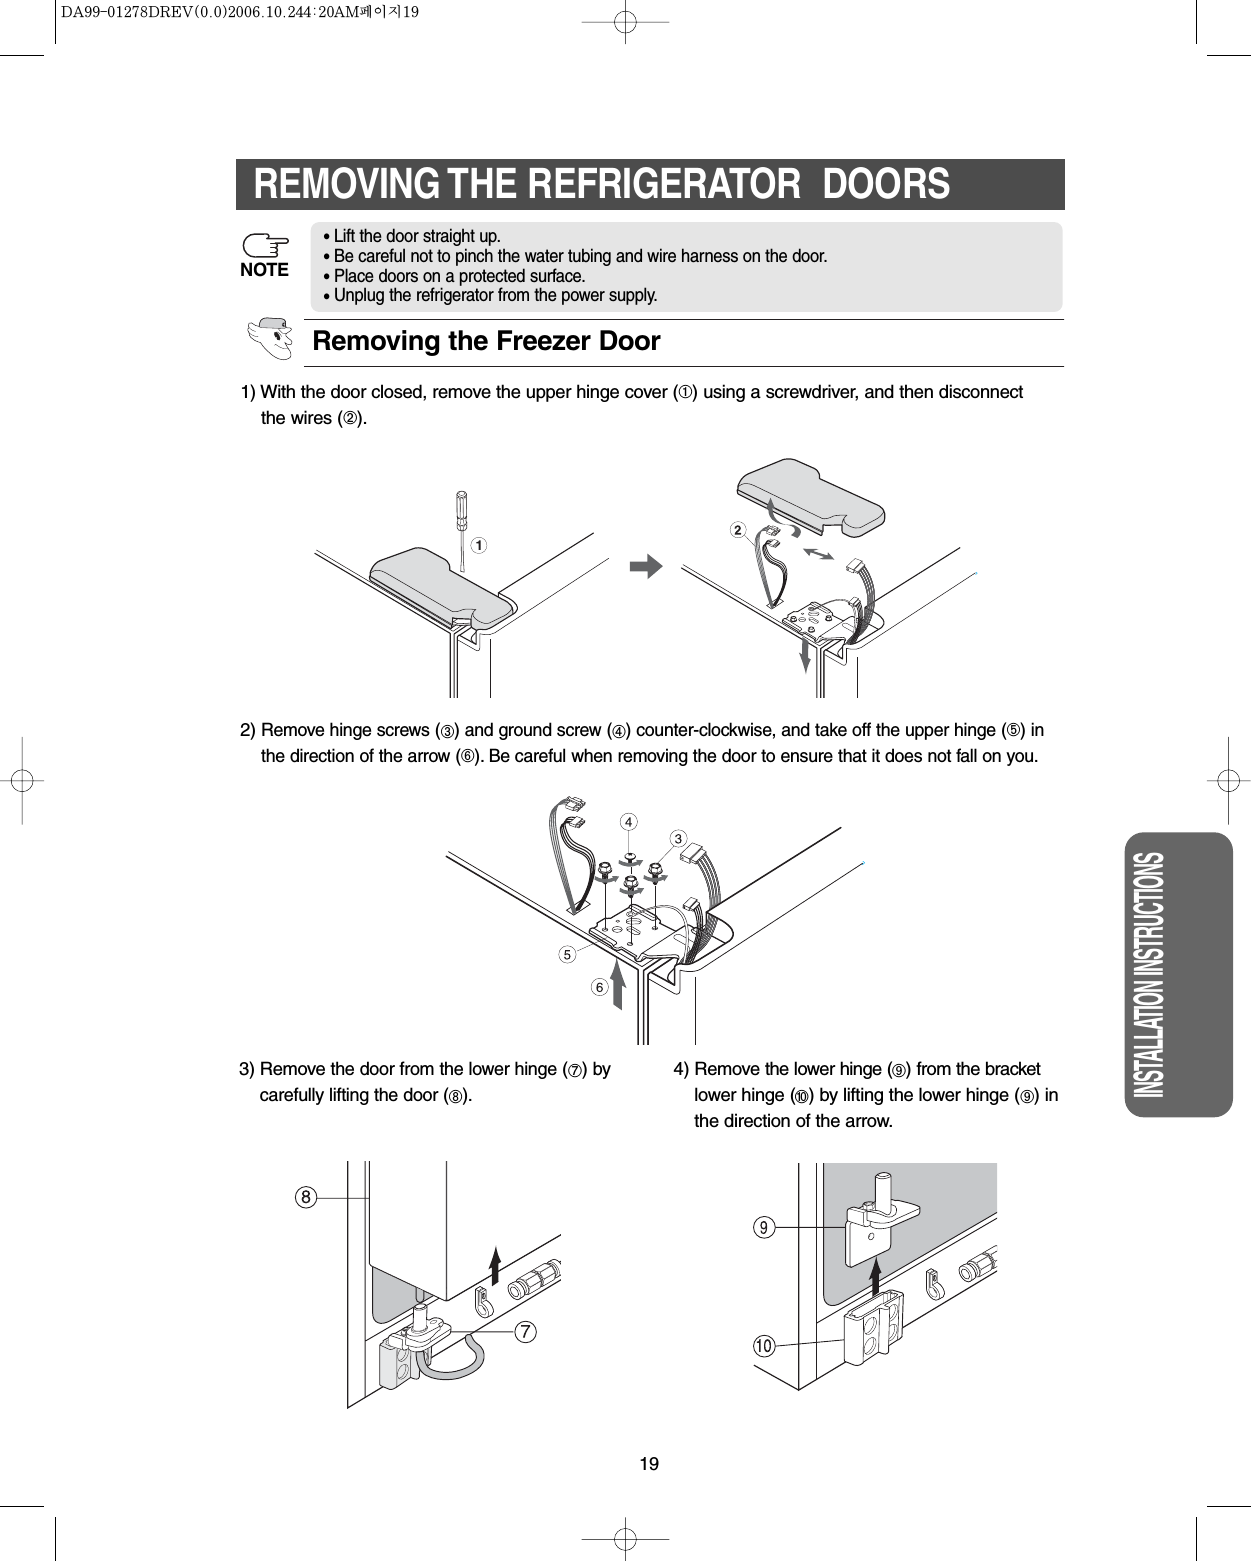 19INSTALLATION INSTRUCTIONSREMOVING THE REFRIGERATOR  DOORS1) With the door closed, remove the upper hinge cover (➀) using a screwdriver, and then disconnectthe wires (➁).2)Remove hinge screws (➂) and ground screw (➃) counter-clockwise, and take off the upper hinge (➄) inthe direction of the arrow (➅). Be careful when removing the door to ensure that it does not fall on you.3) Removethe door from the lower hinge (➆)bycarefully lifting the door (➇).4) Remove the lower hinge (➈) from the bracketlower hinge (➉) by lifting the lower hinge (➈) inthe direction of the arrow.Removing the Freezer Door•Lift the door straight up.•Be careful not to pinch the water tubing and wire harness on the door.•Place doors on a protected surface.•Unplug the refrigerator from the power supply.NOTE